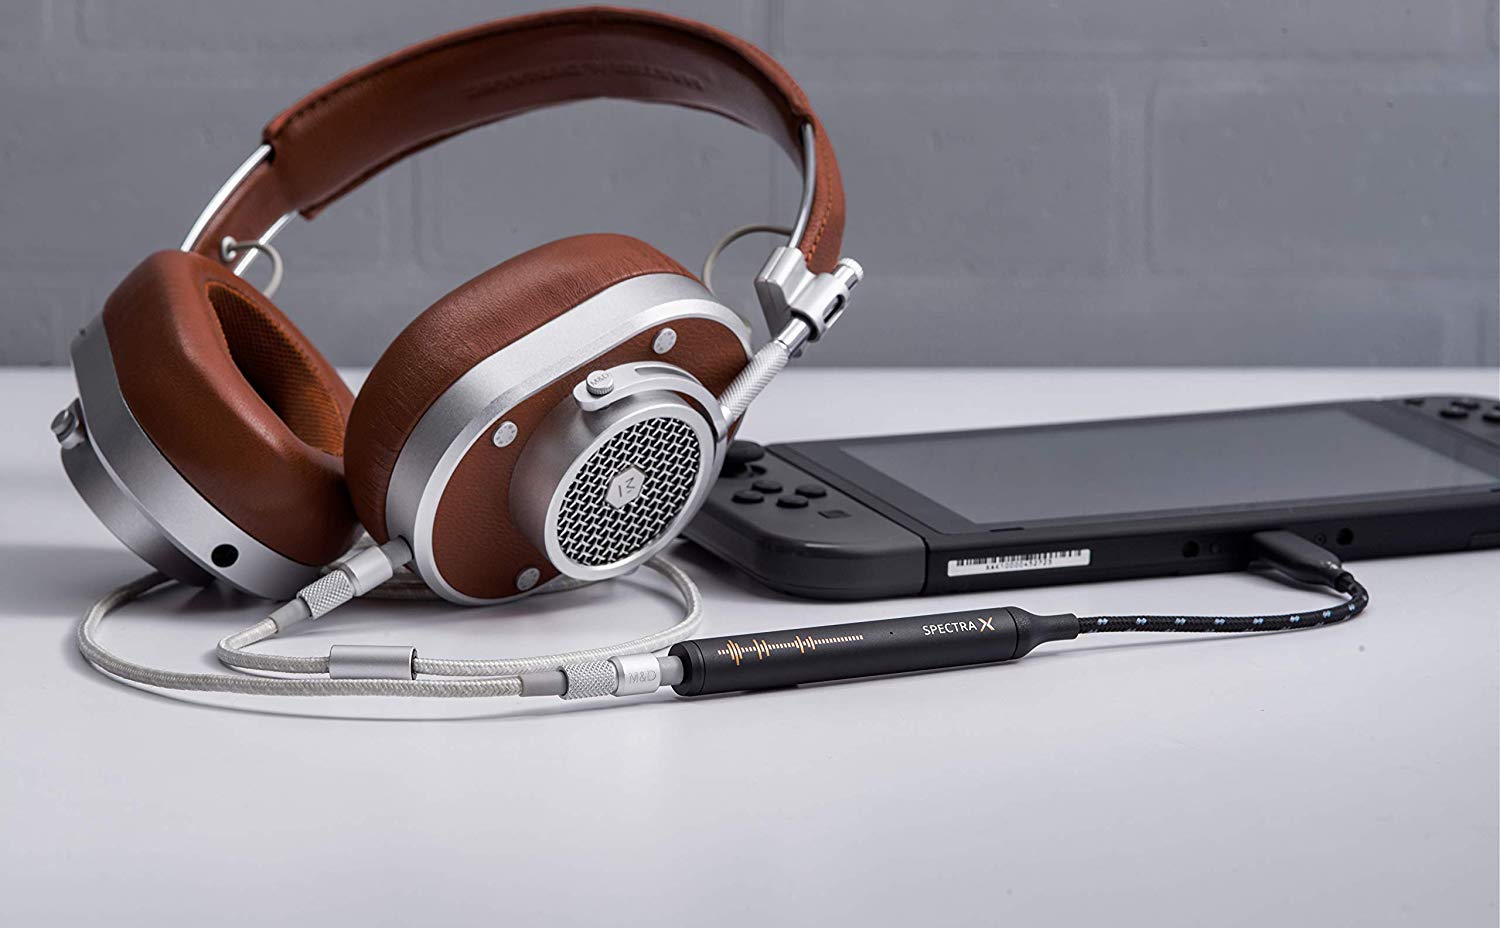 NextDrive Spectra X amplifier plugged into Master & Dynamic brown leather headphones. Also connected to a Nintendo Switch in black. All items are on a white table.